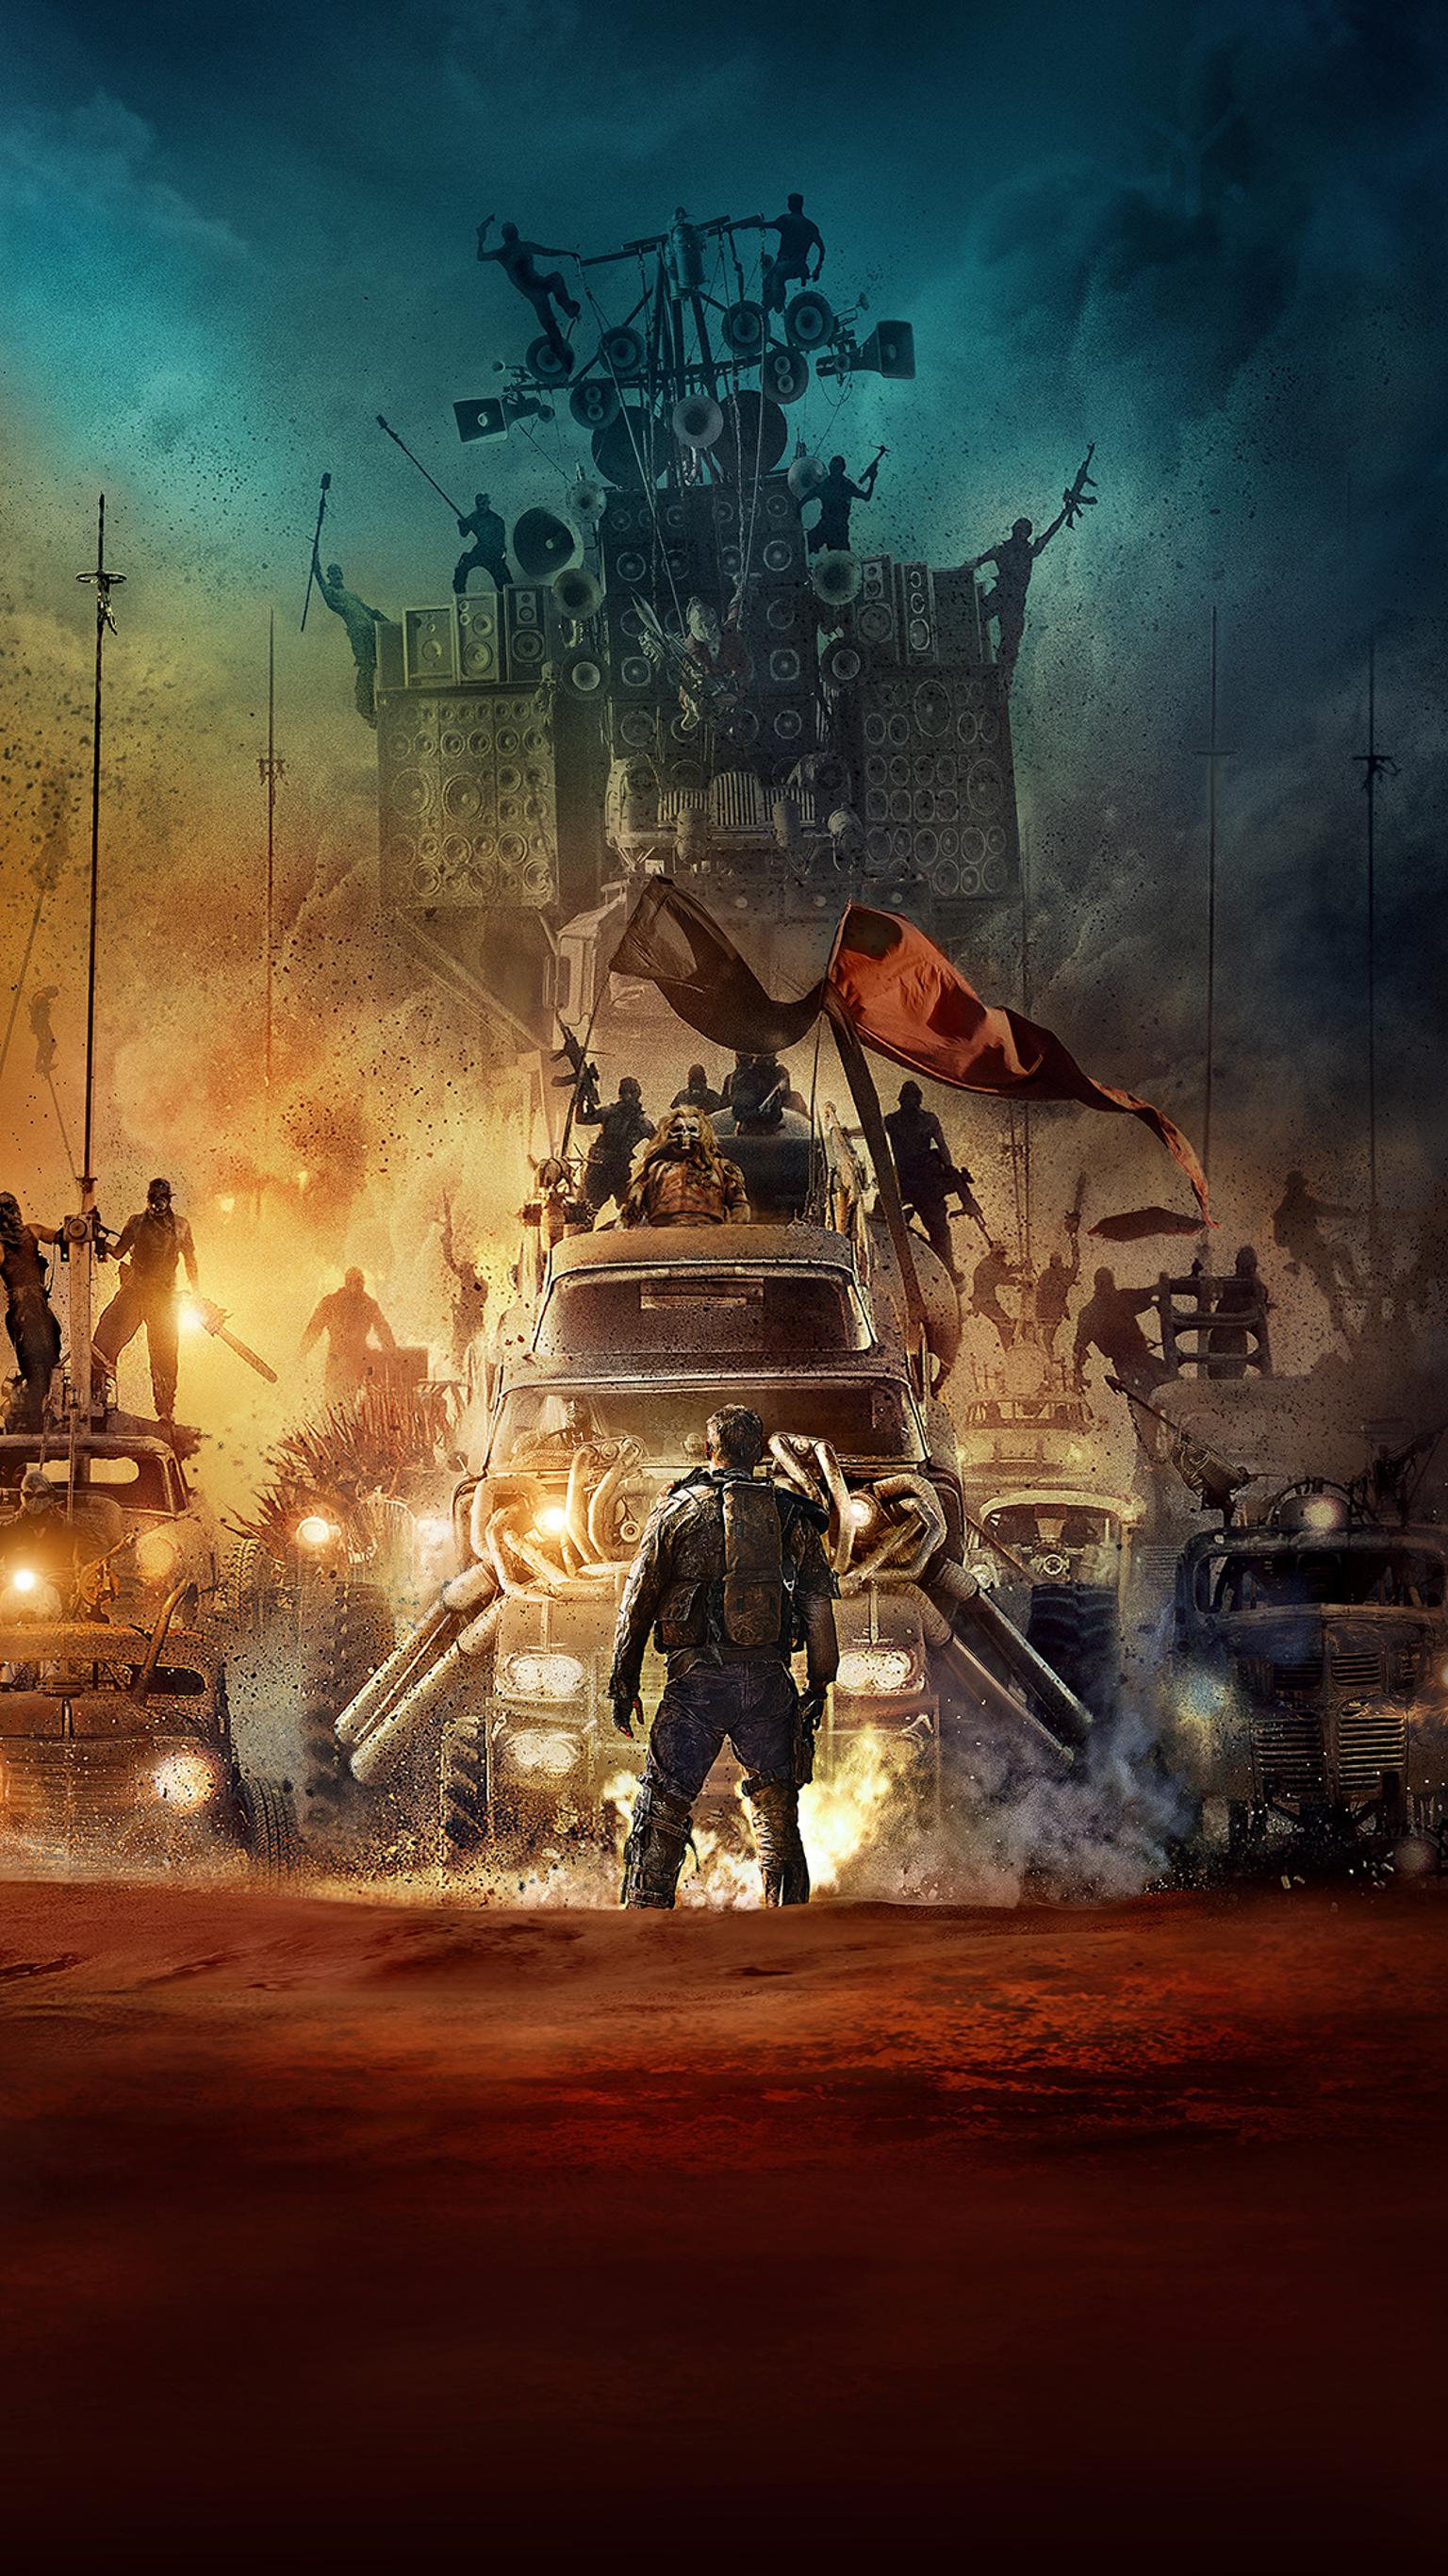 Mad Max: Fury Road, 2015 movie 640x1136 iPhone 5/5S/5C/SE wallpaper,  background, picture, image